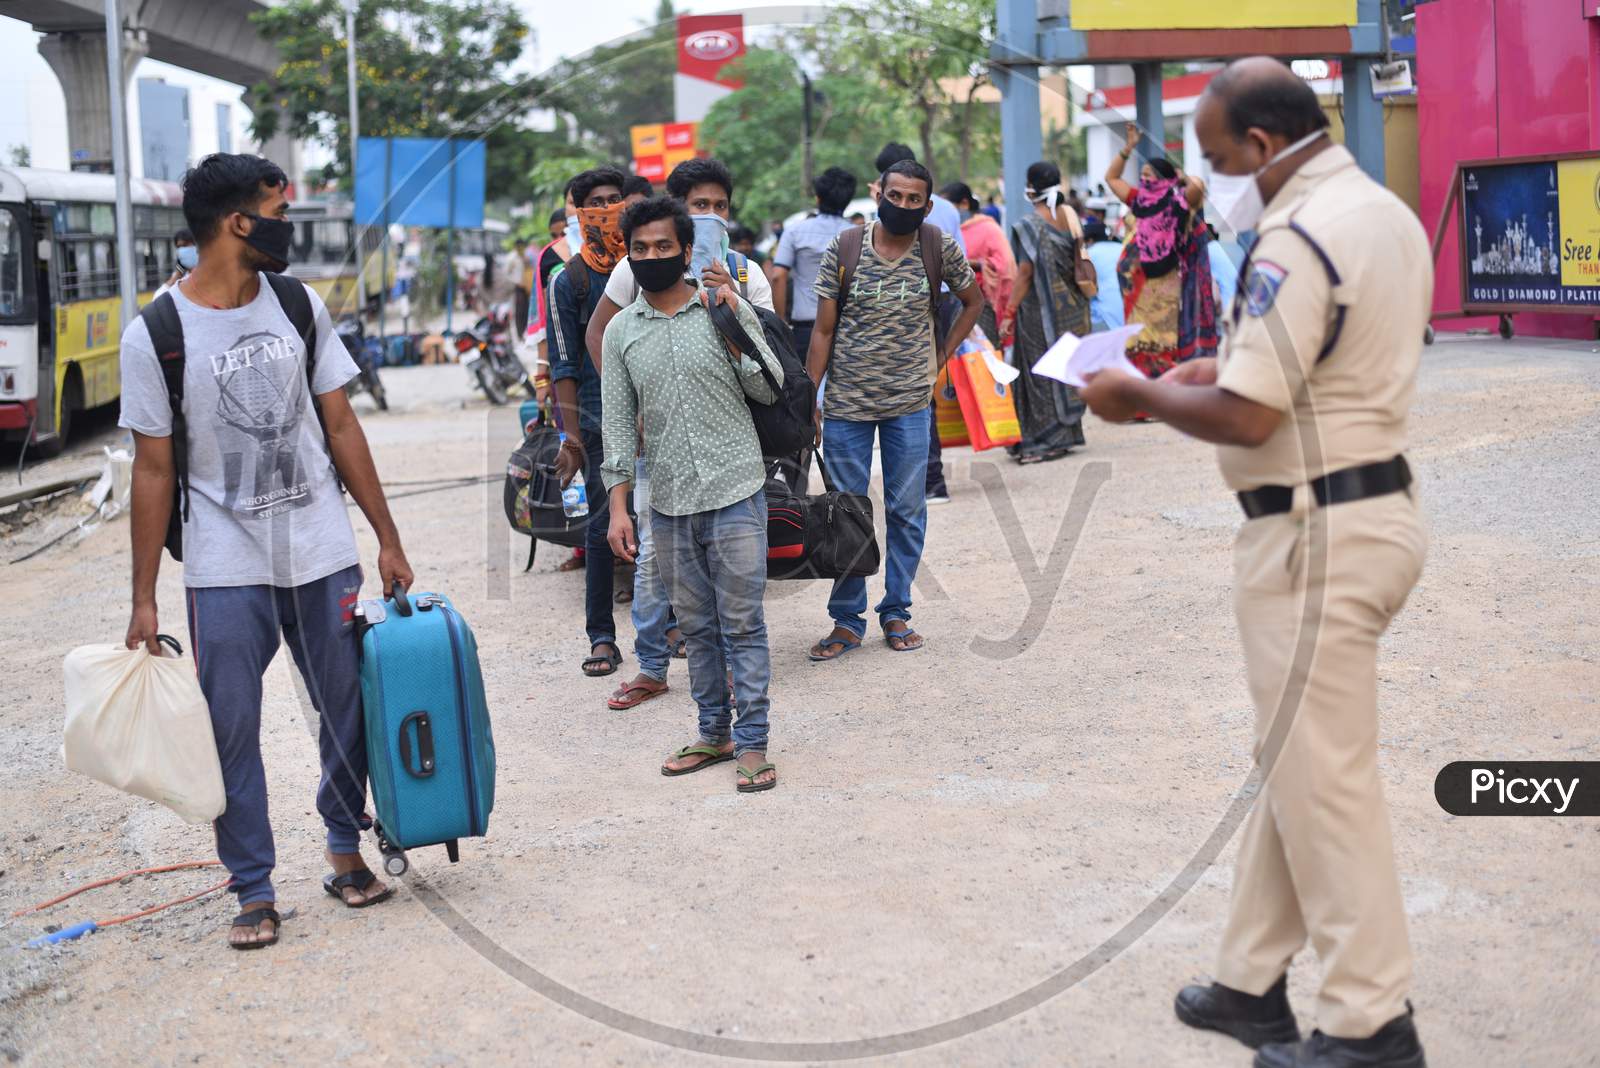 Migrant Workers from Bihar, Jharkhand and UP get themselves registered from Cyberabad Police to get onto a Shramik Special Train during ongoing Nationwide Lockdown amid Coronavirus Pandemic, Kukatpally,Hyderabad, May 19,2020.